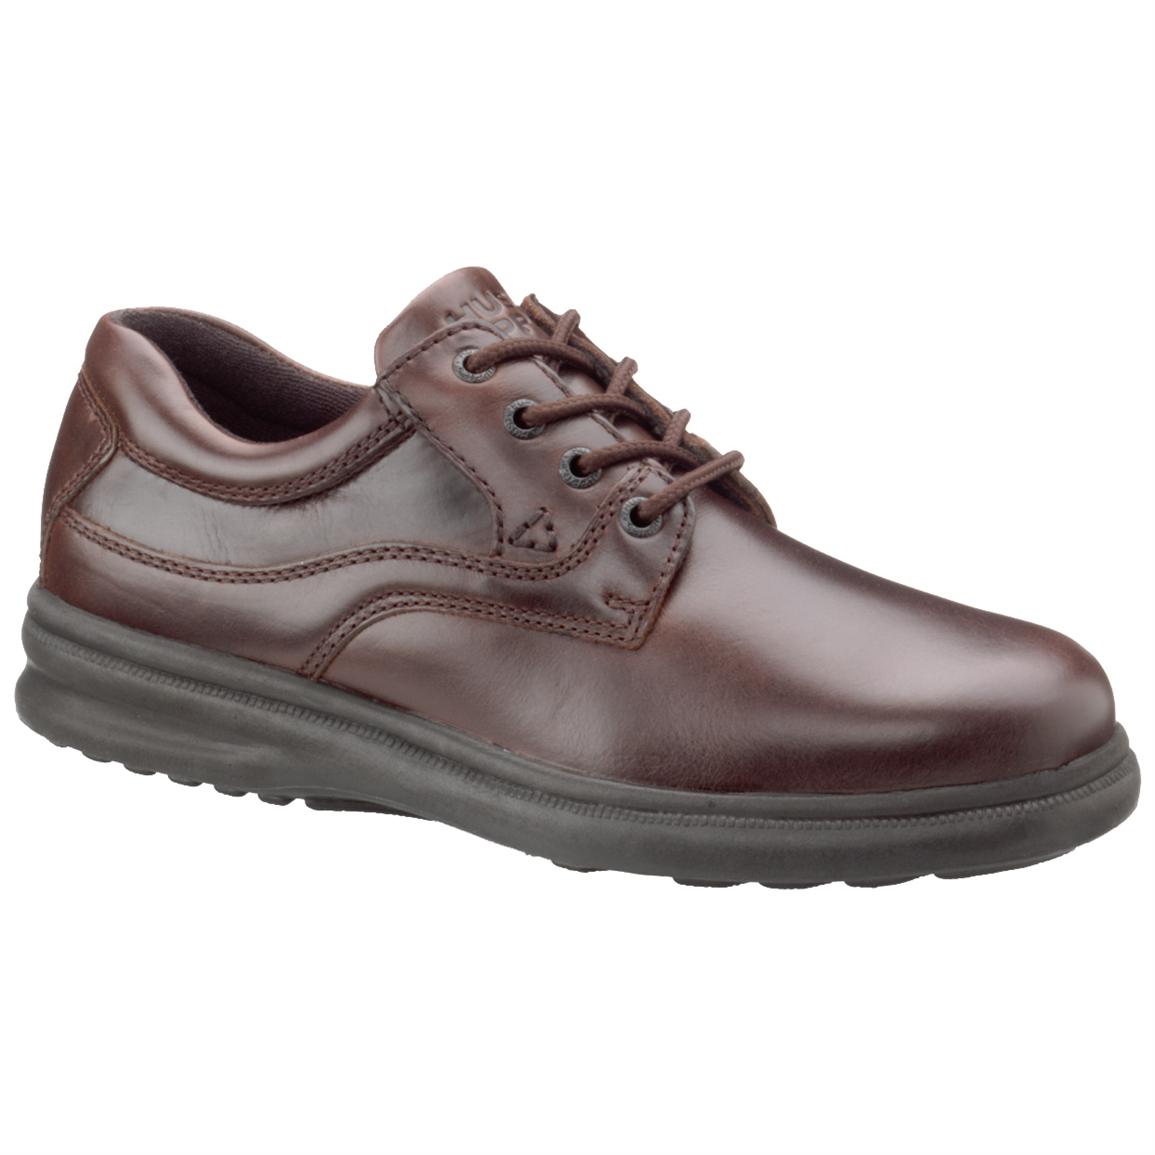 Men's Hush Puppies® Glen Shoes - 153130, Casual Shoes at Sportsman's Guide